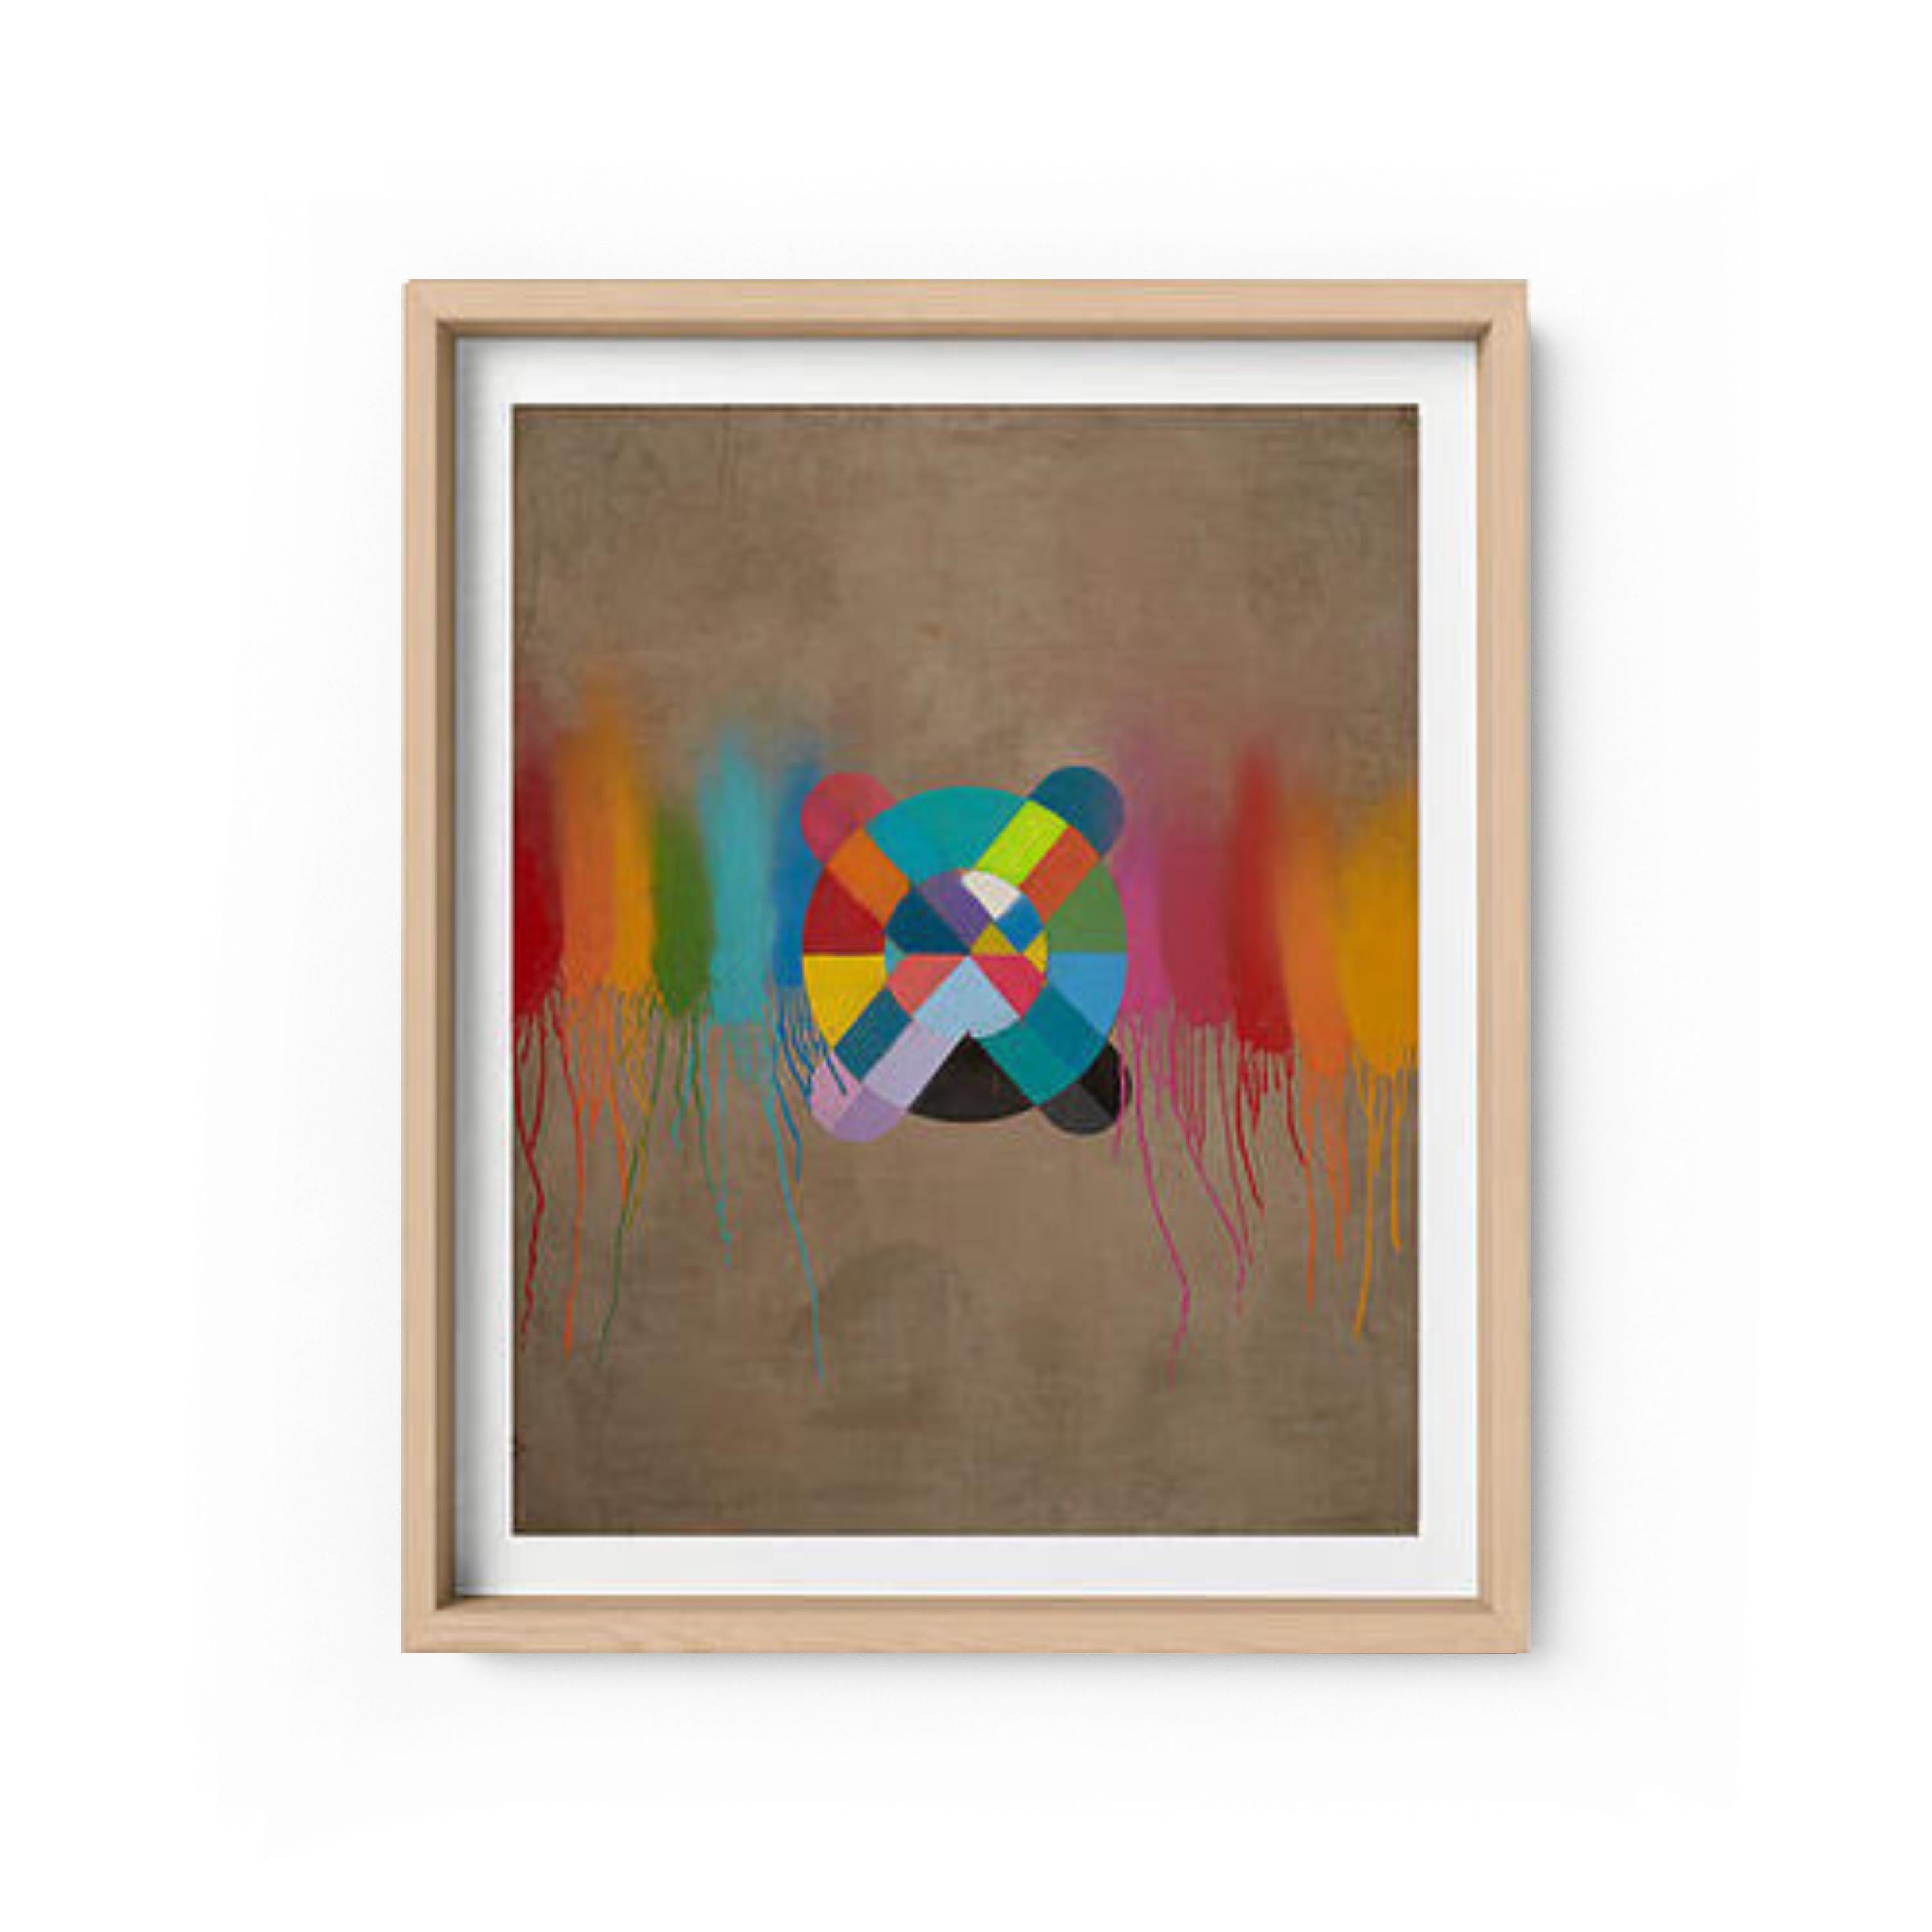 Karlos Marquez Abstract Print - Unity - Framed Limited Edition Print - Contemporary - Modern - Graffiti - Street